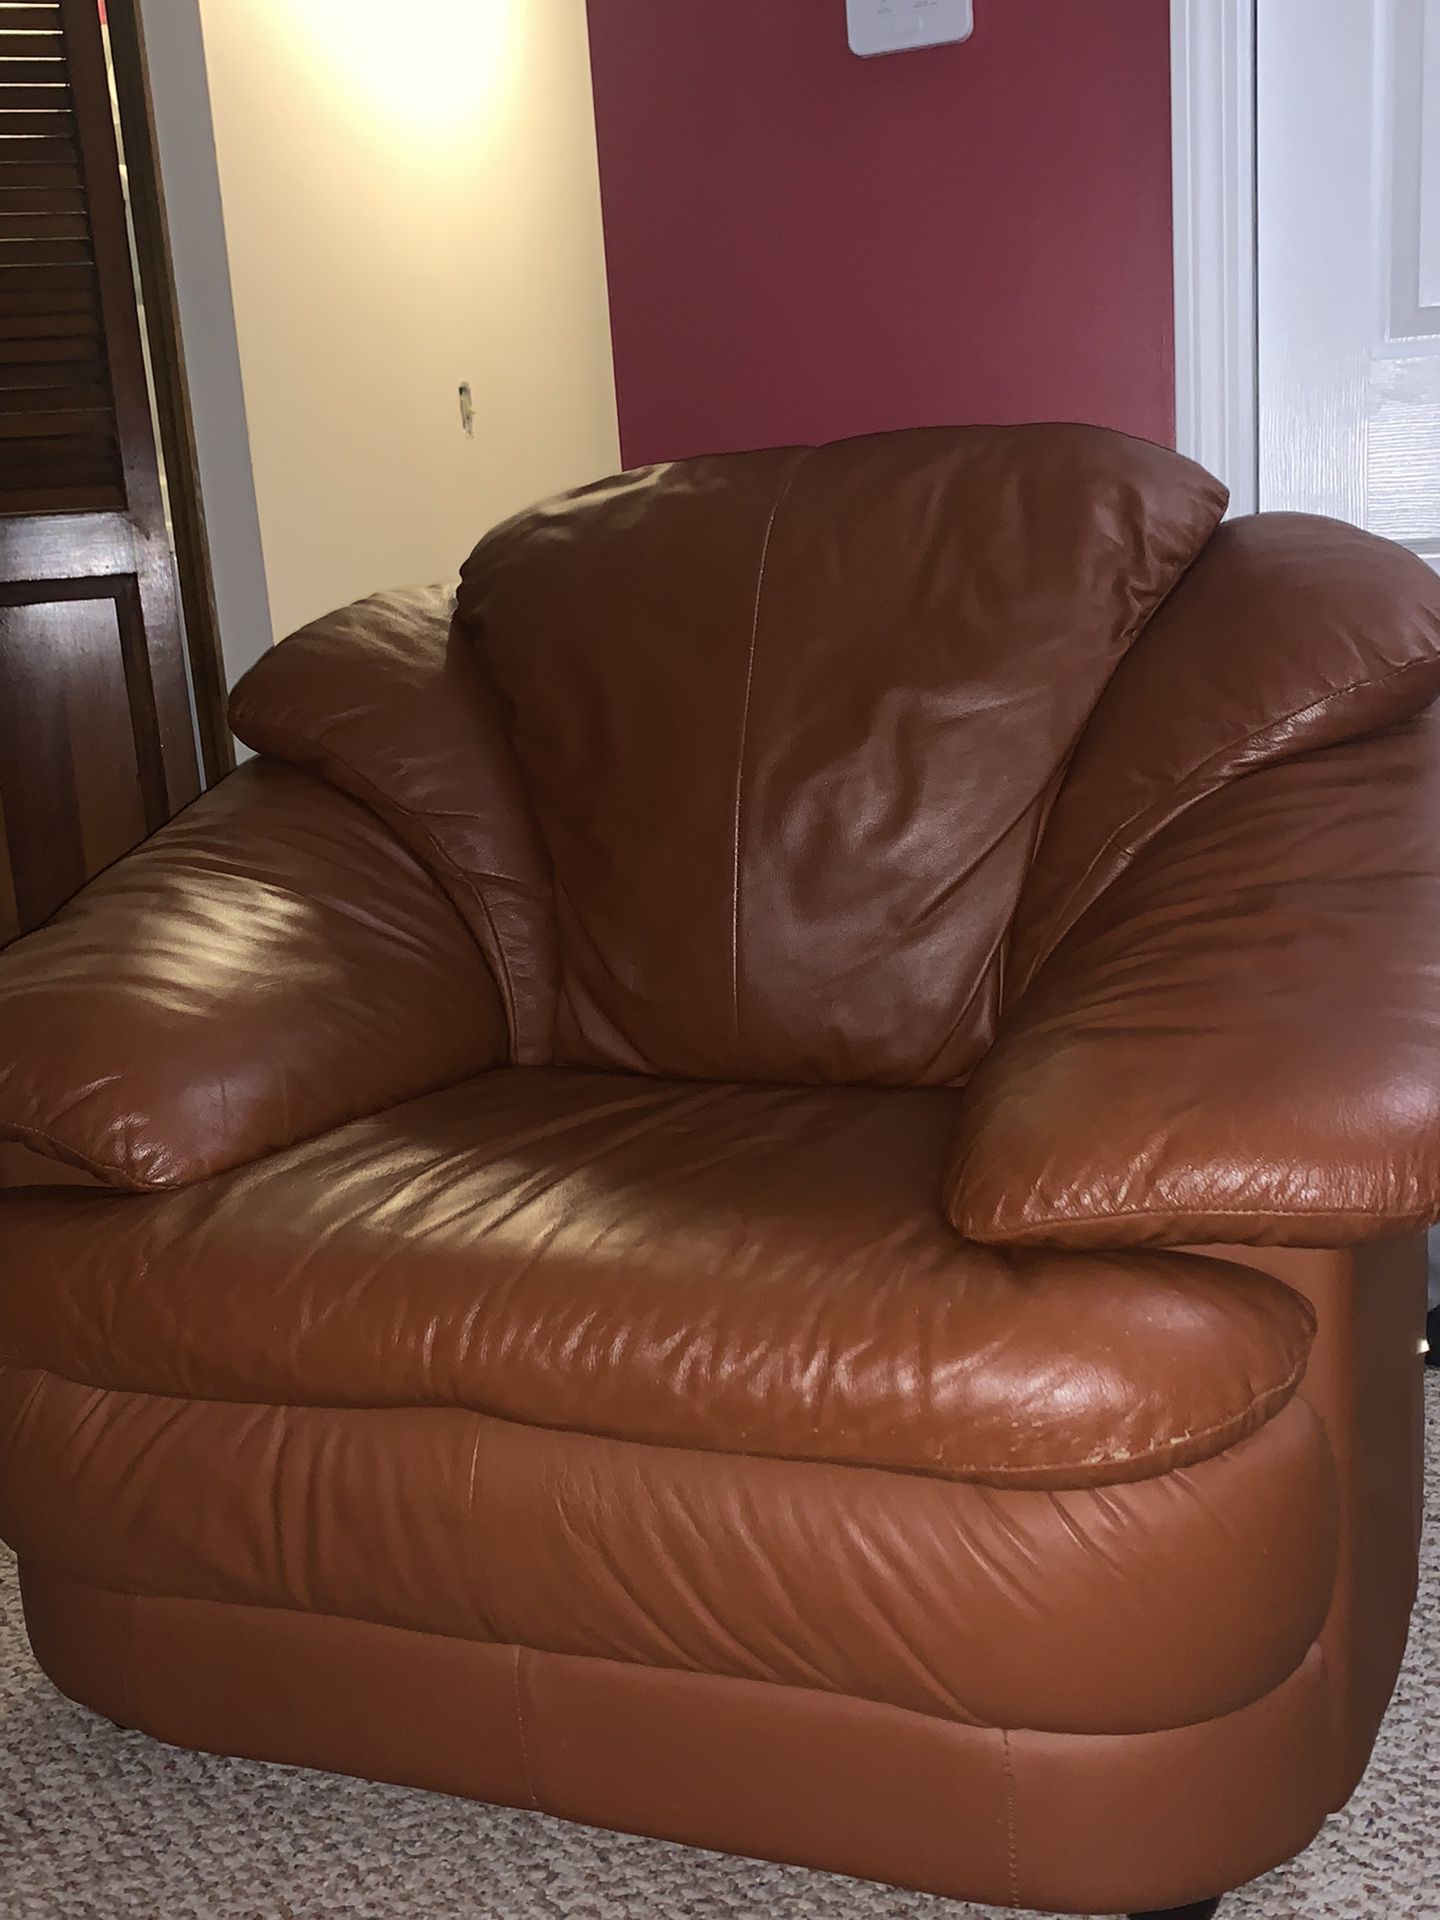 Burgundy\ Brown Leather Couch Set